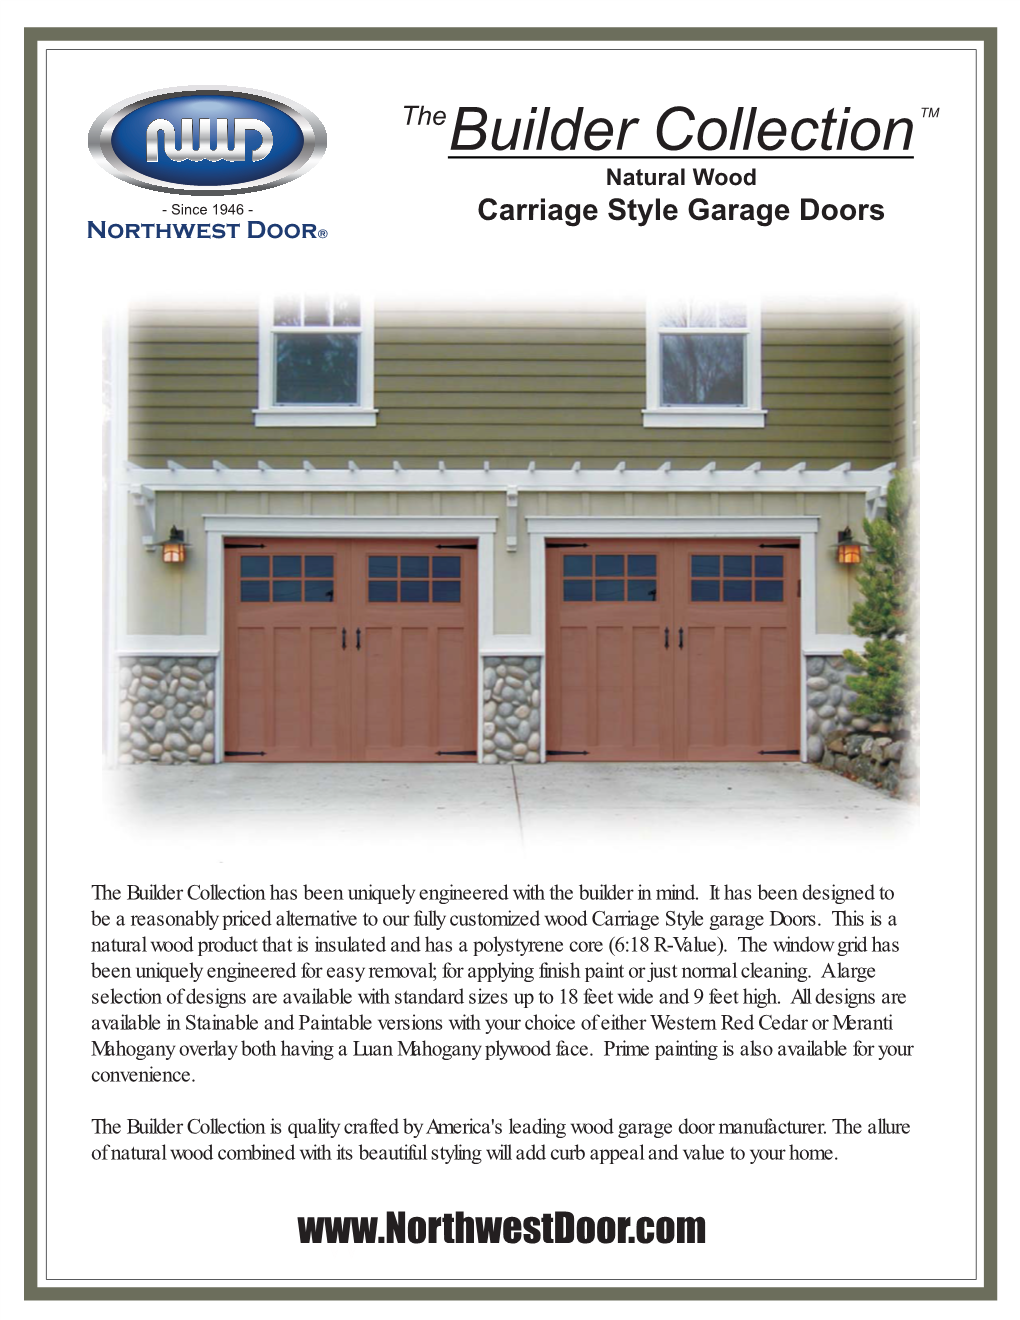 Thebuilder Collectiontm Carriage Style Garage Doors